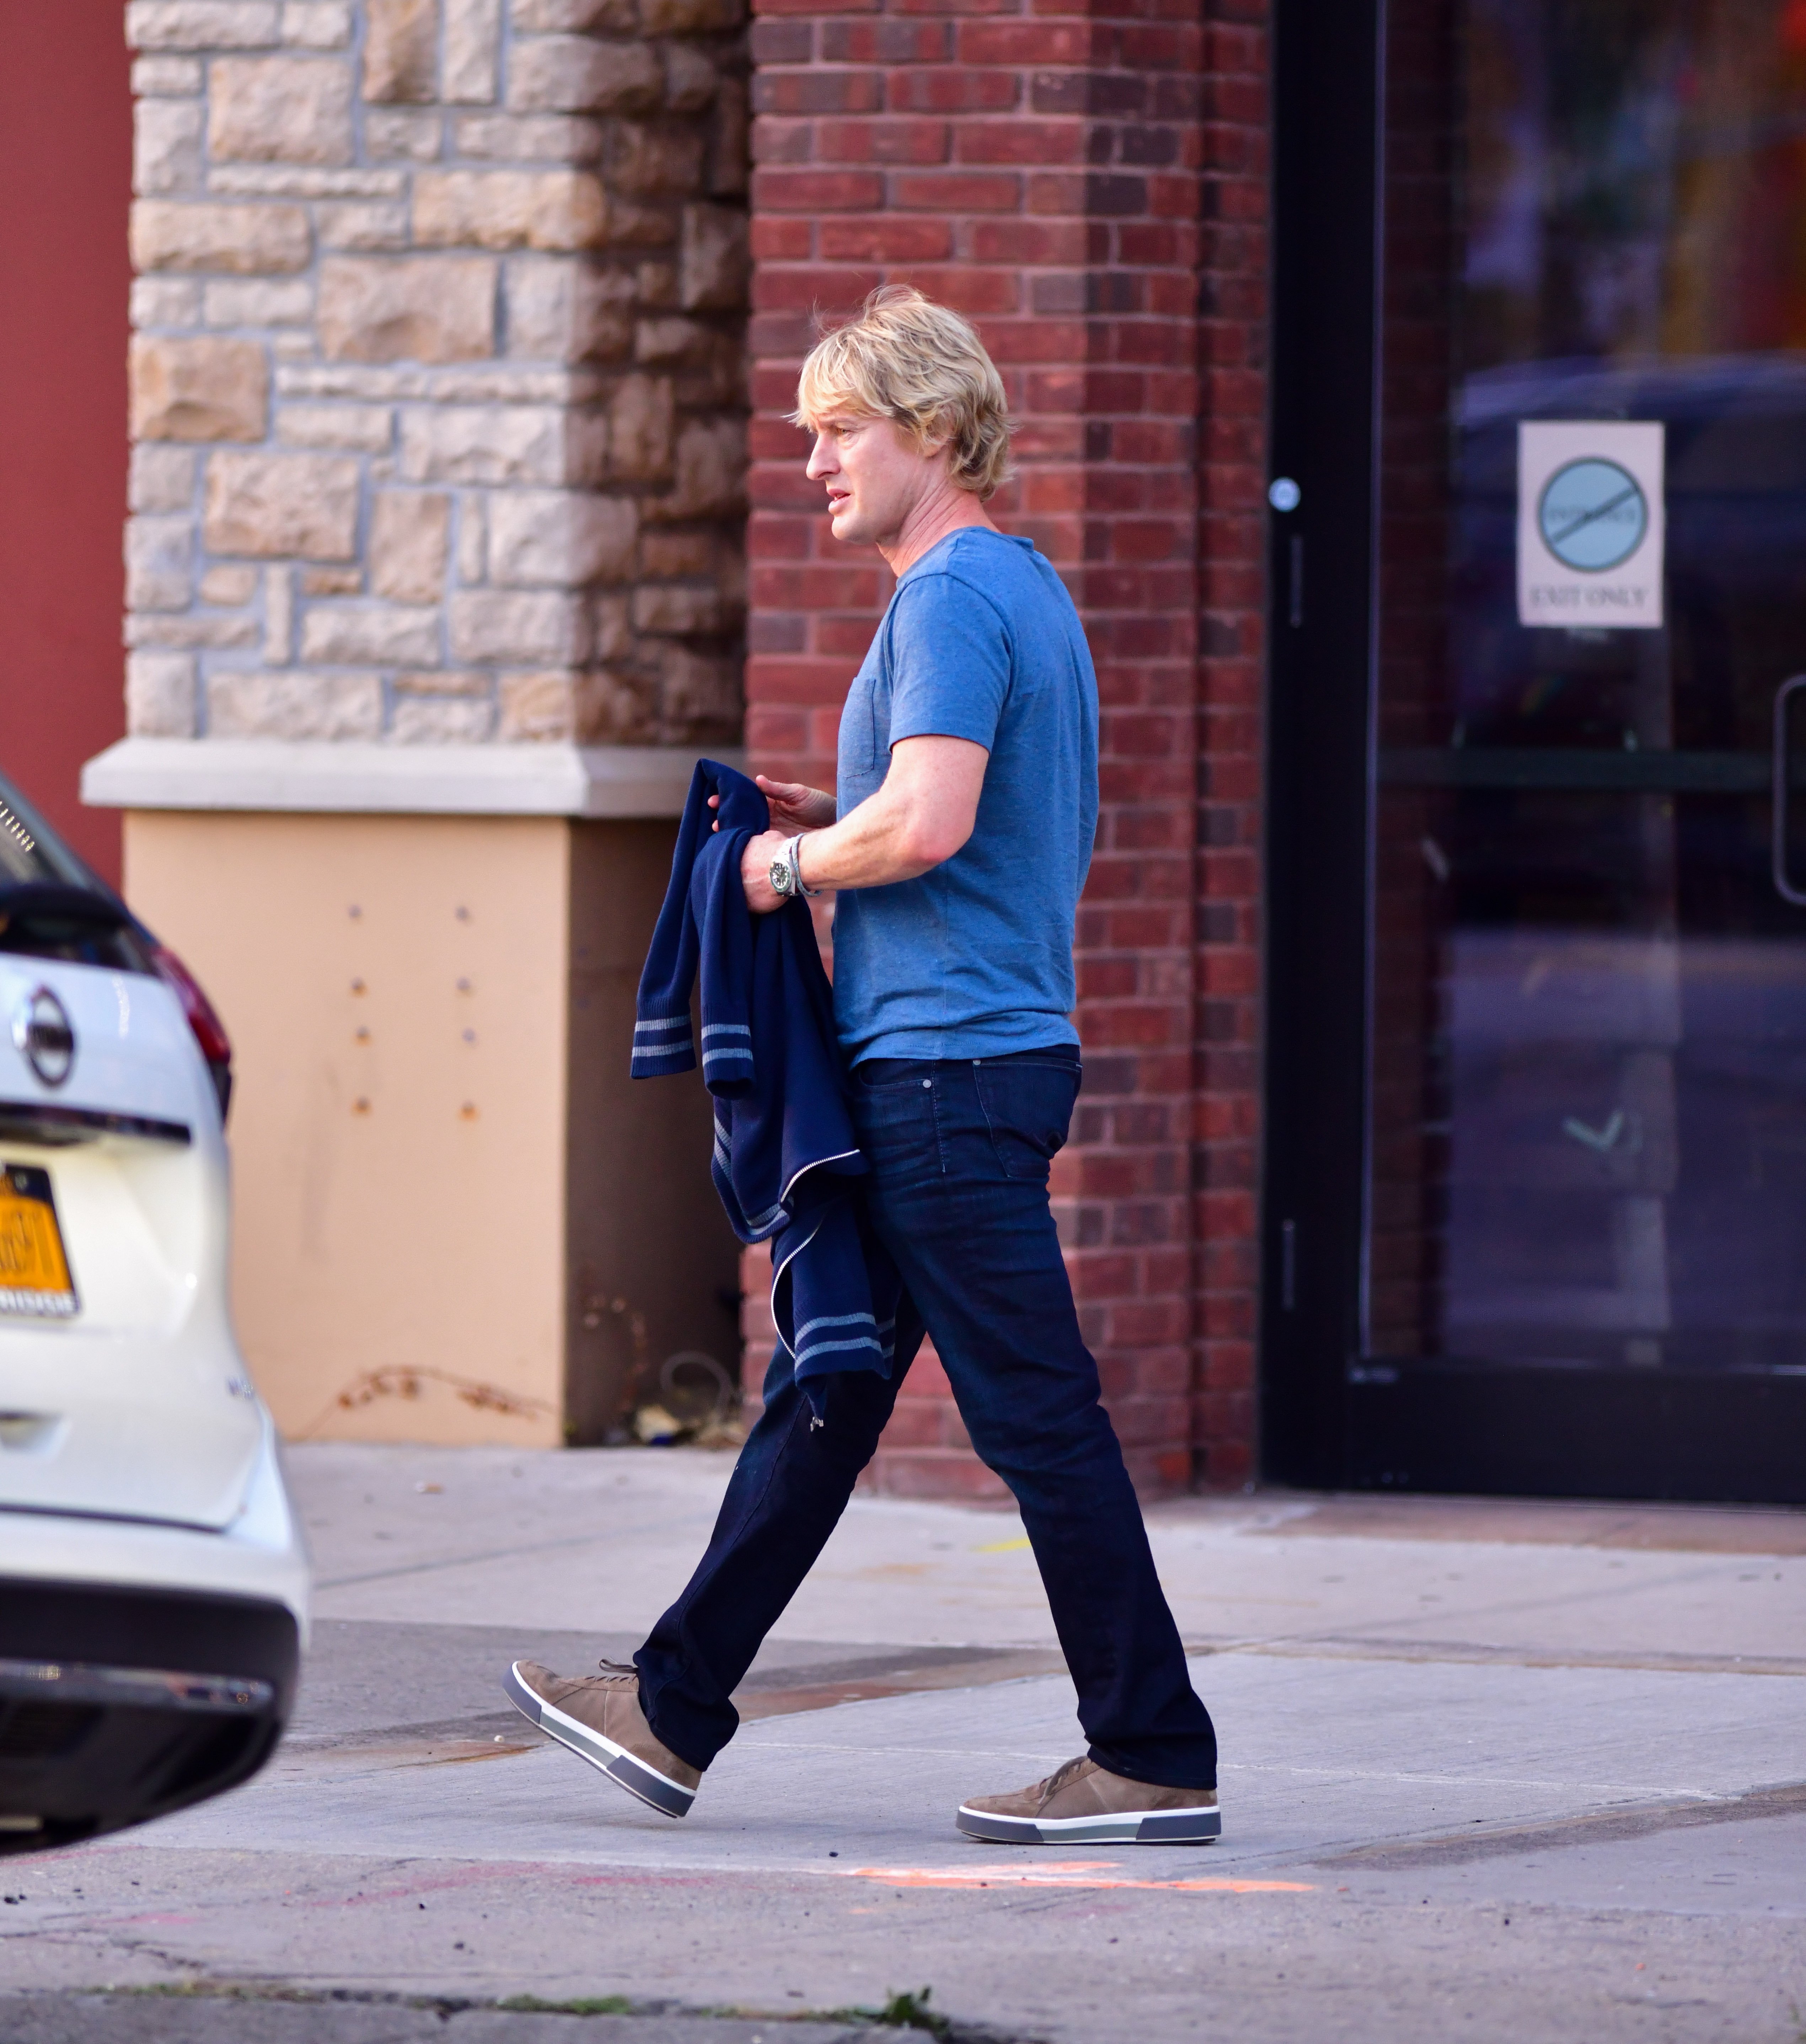 Owen Wilson seen on location for "Marry Me" at Deno's Wonder Wheel Amusement Park in Coney Island, Brooklyn, on October 1, 2019, in New York City. | Source: Getty Images